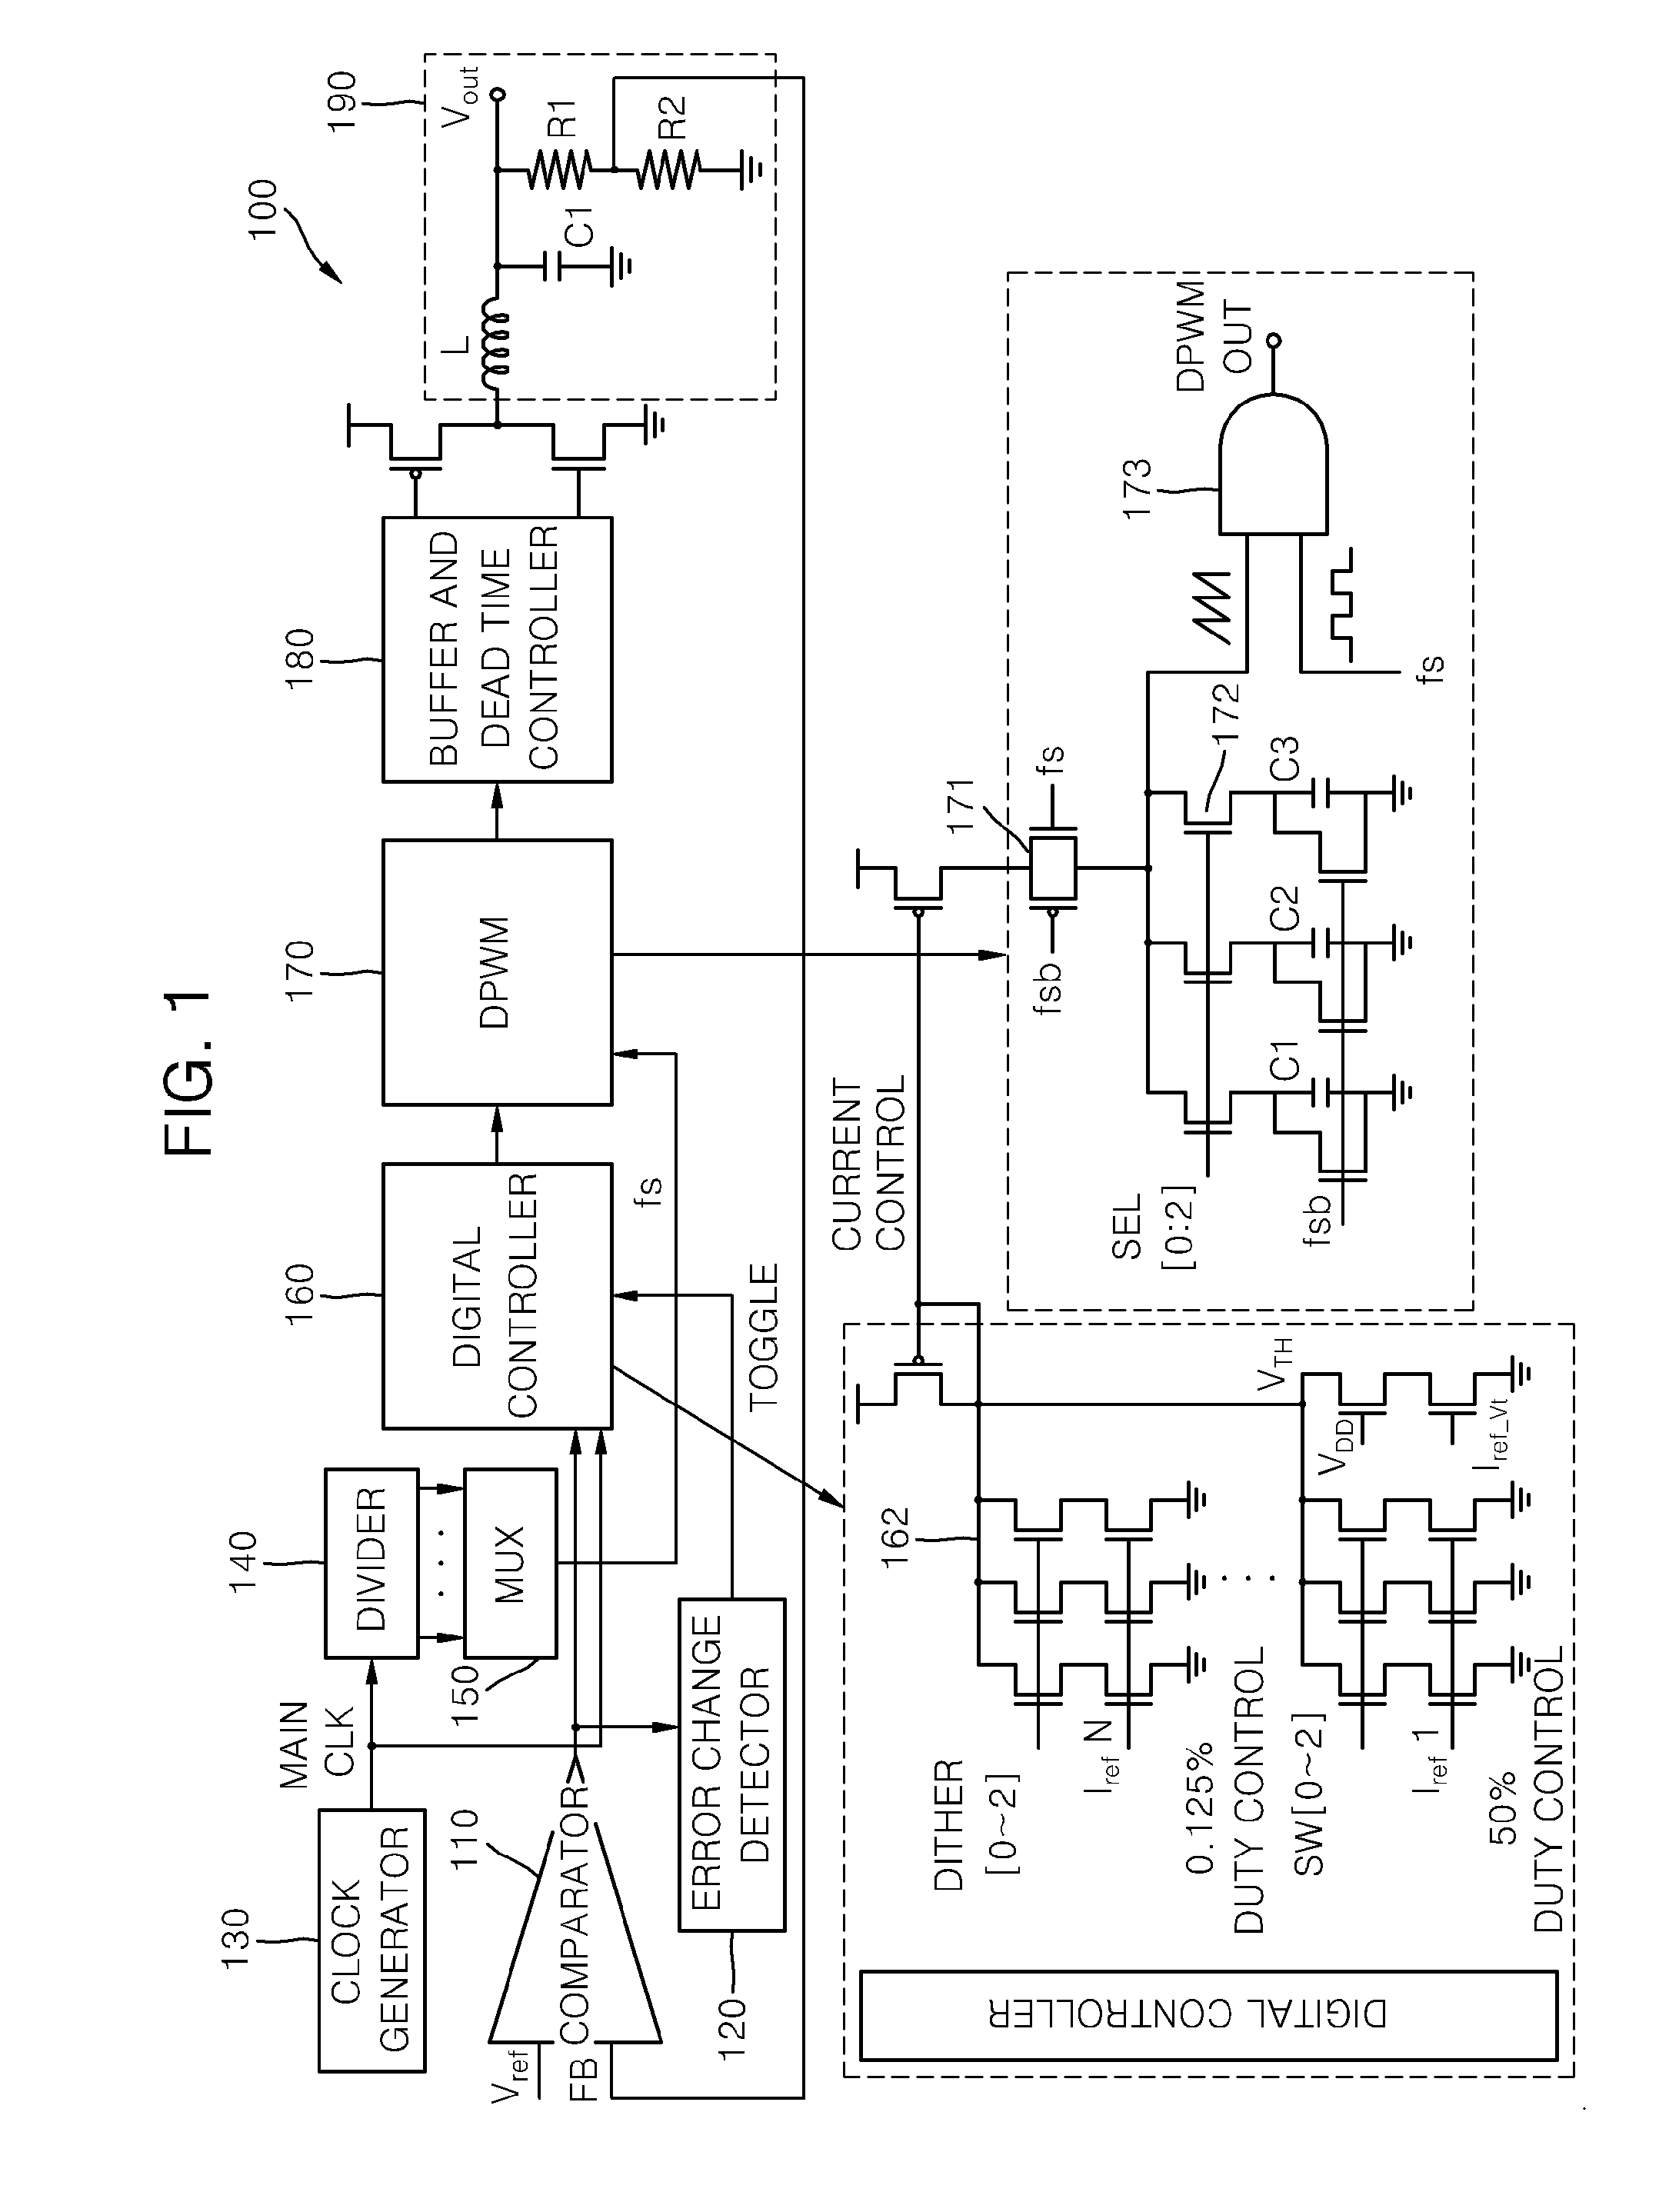 Device for controlling a switching mode power supply